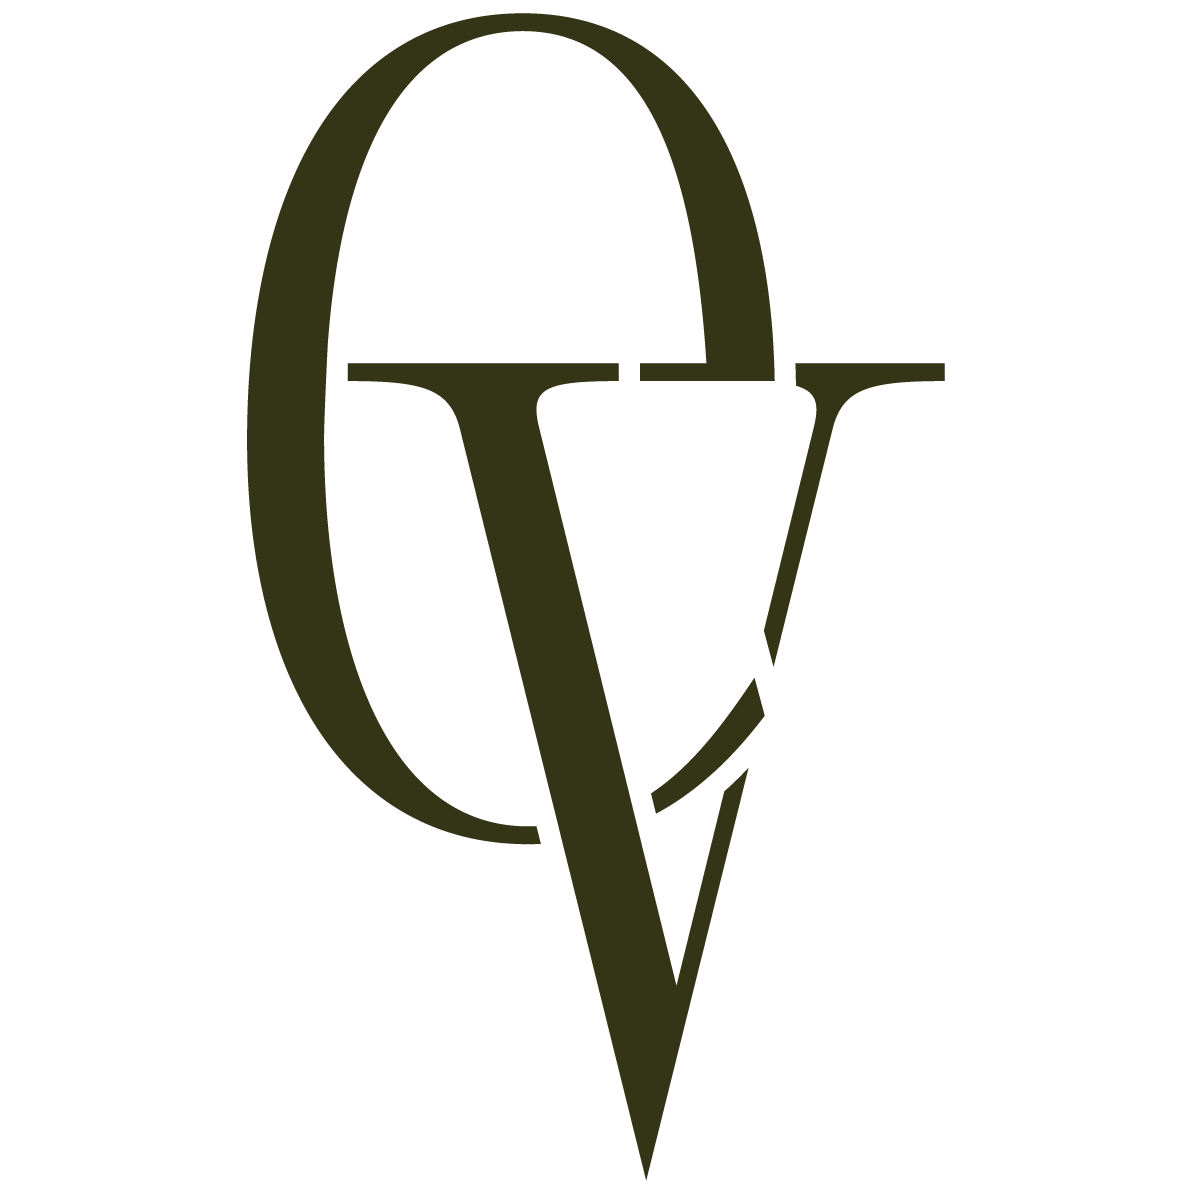 Made this Inlay of the Dominion VP Symbol : r/dominion